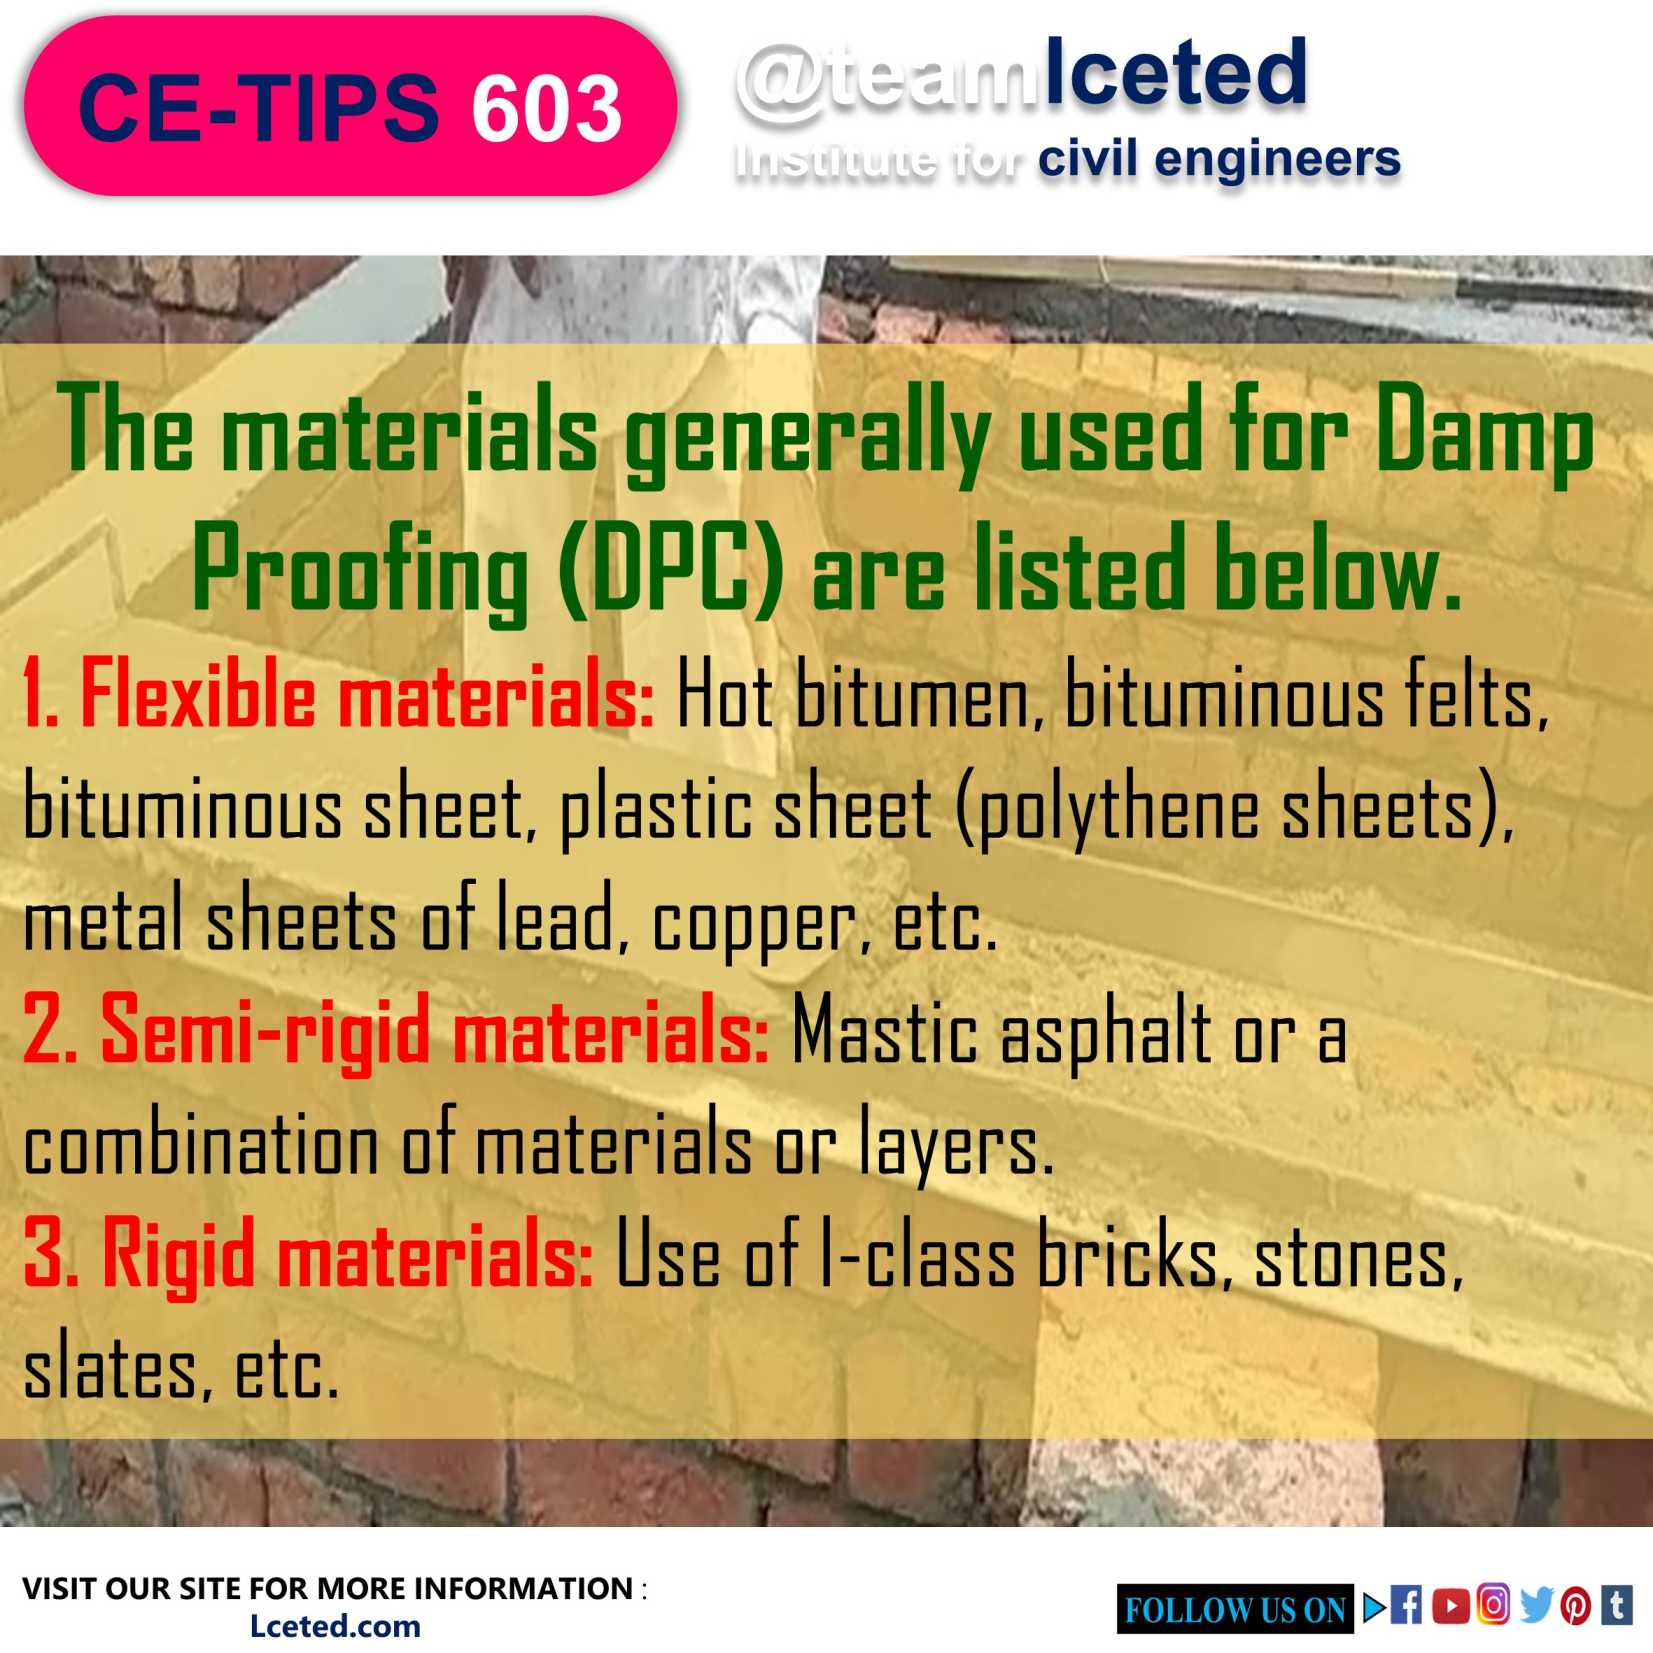 Materials Used For Damp Proofing (DPC)